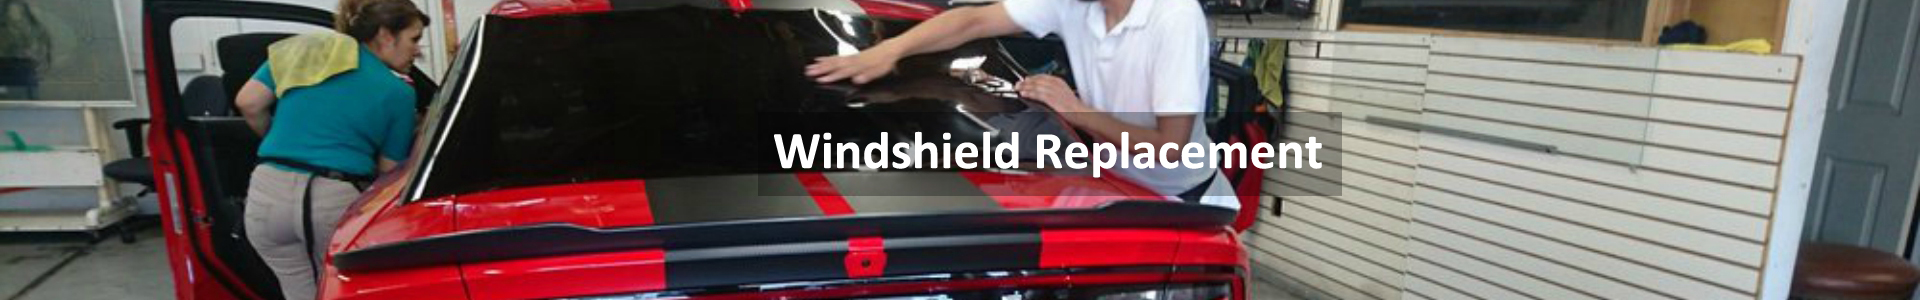 windshield replacement Tulare and Kings County 